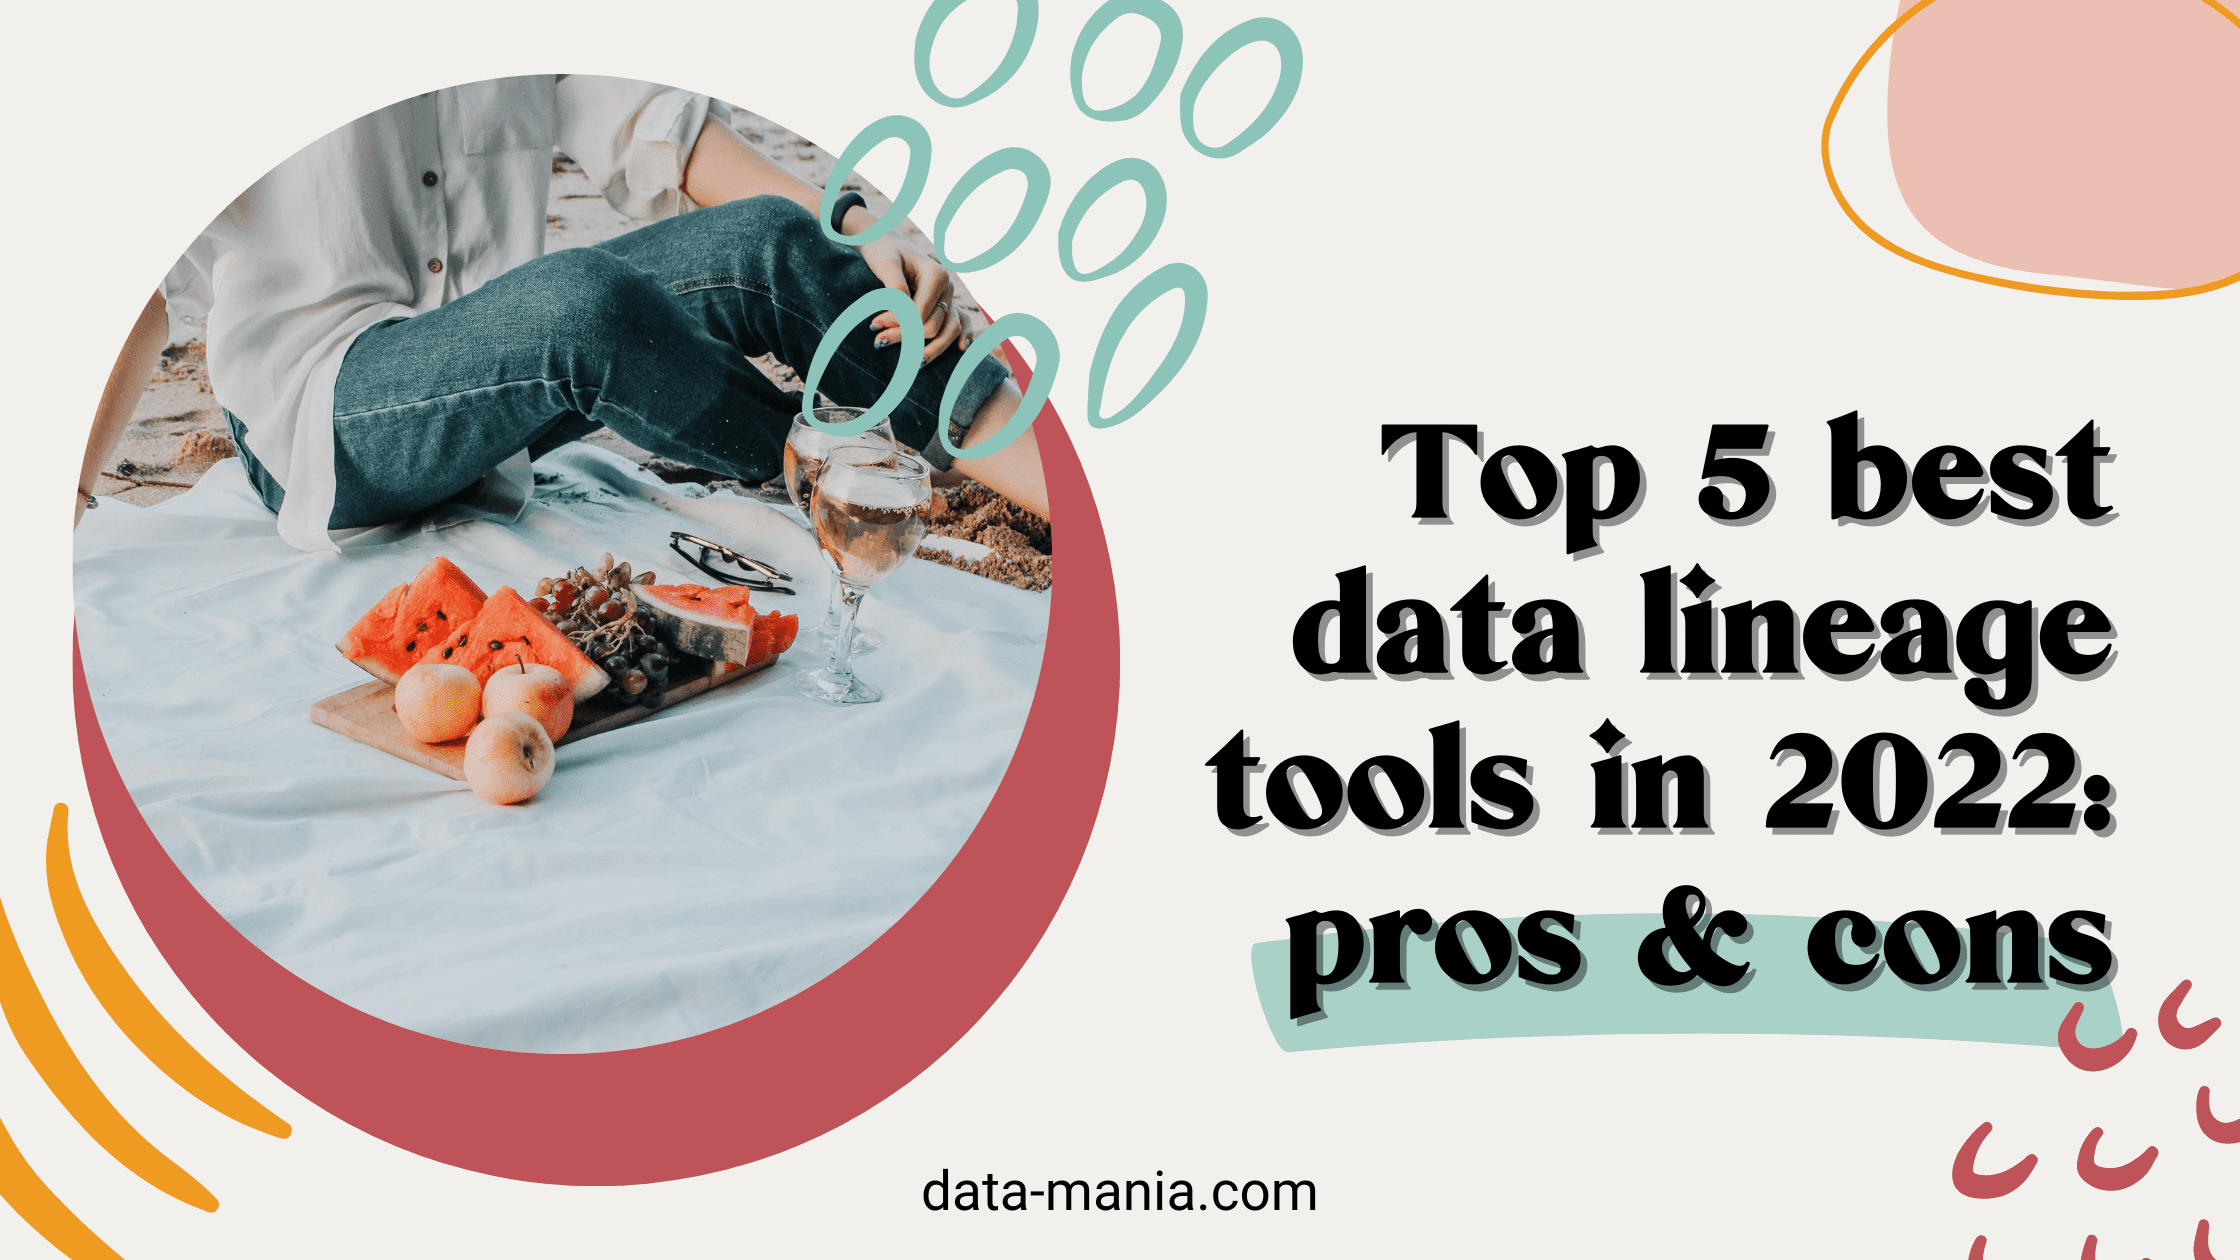 The top 5 data lineage tools in 2022 PROs & CONs